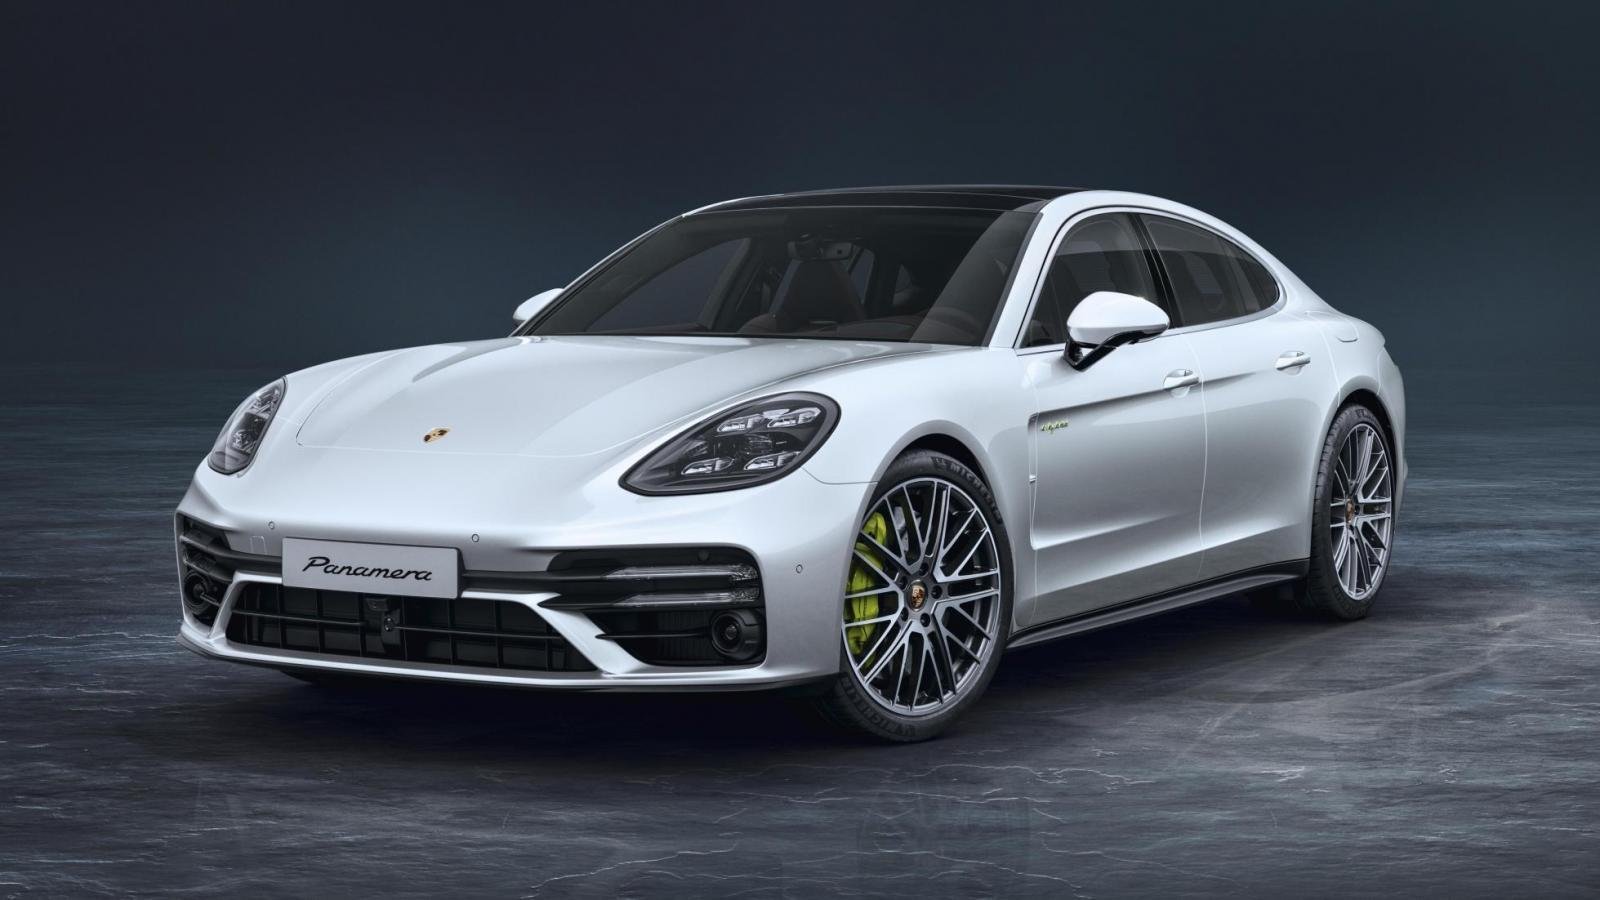 Updated Porsche Panamera Launched In India, Prices Start From 1.45 Crore